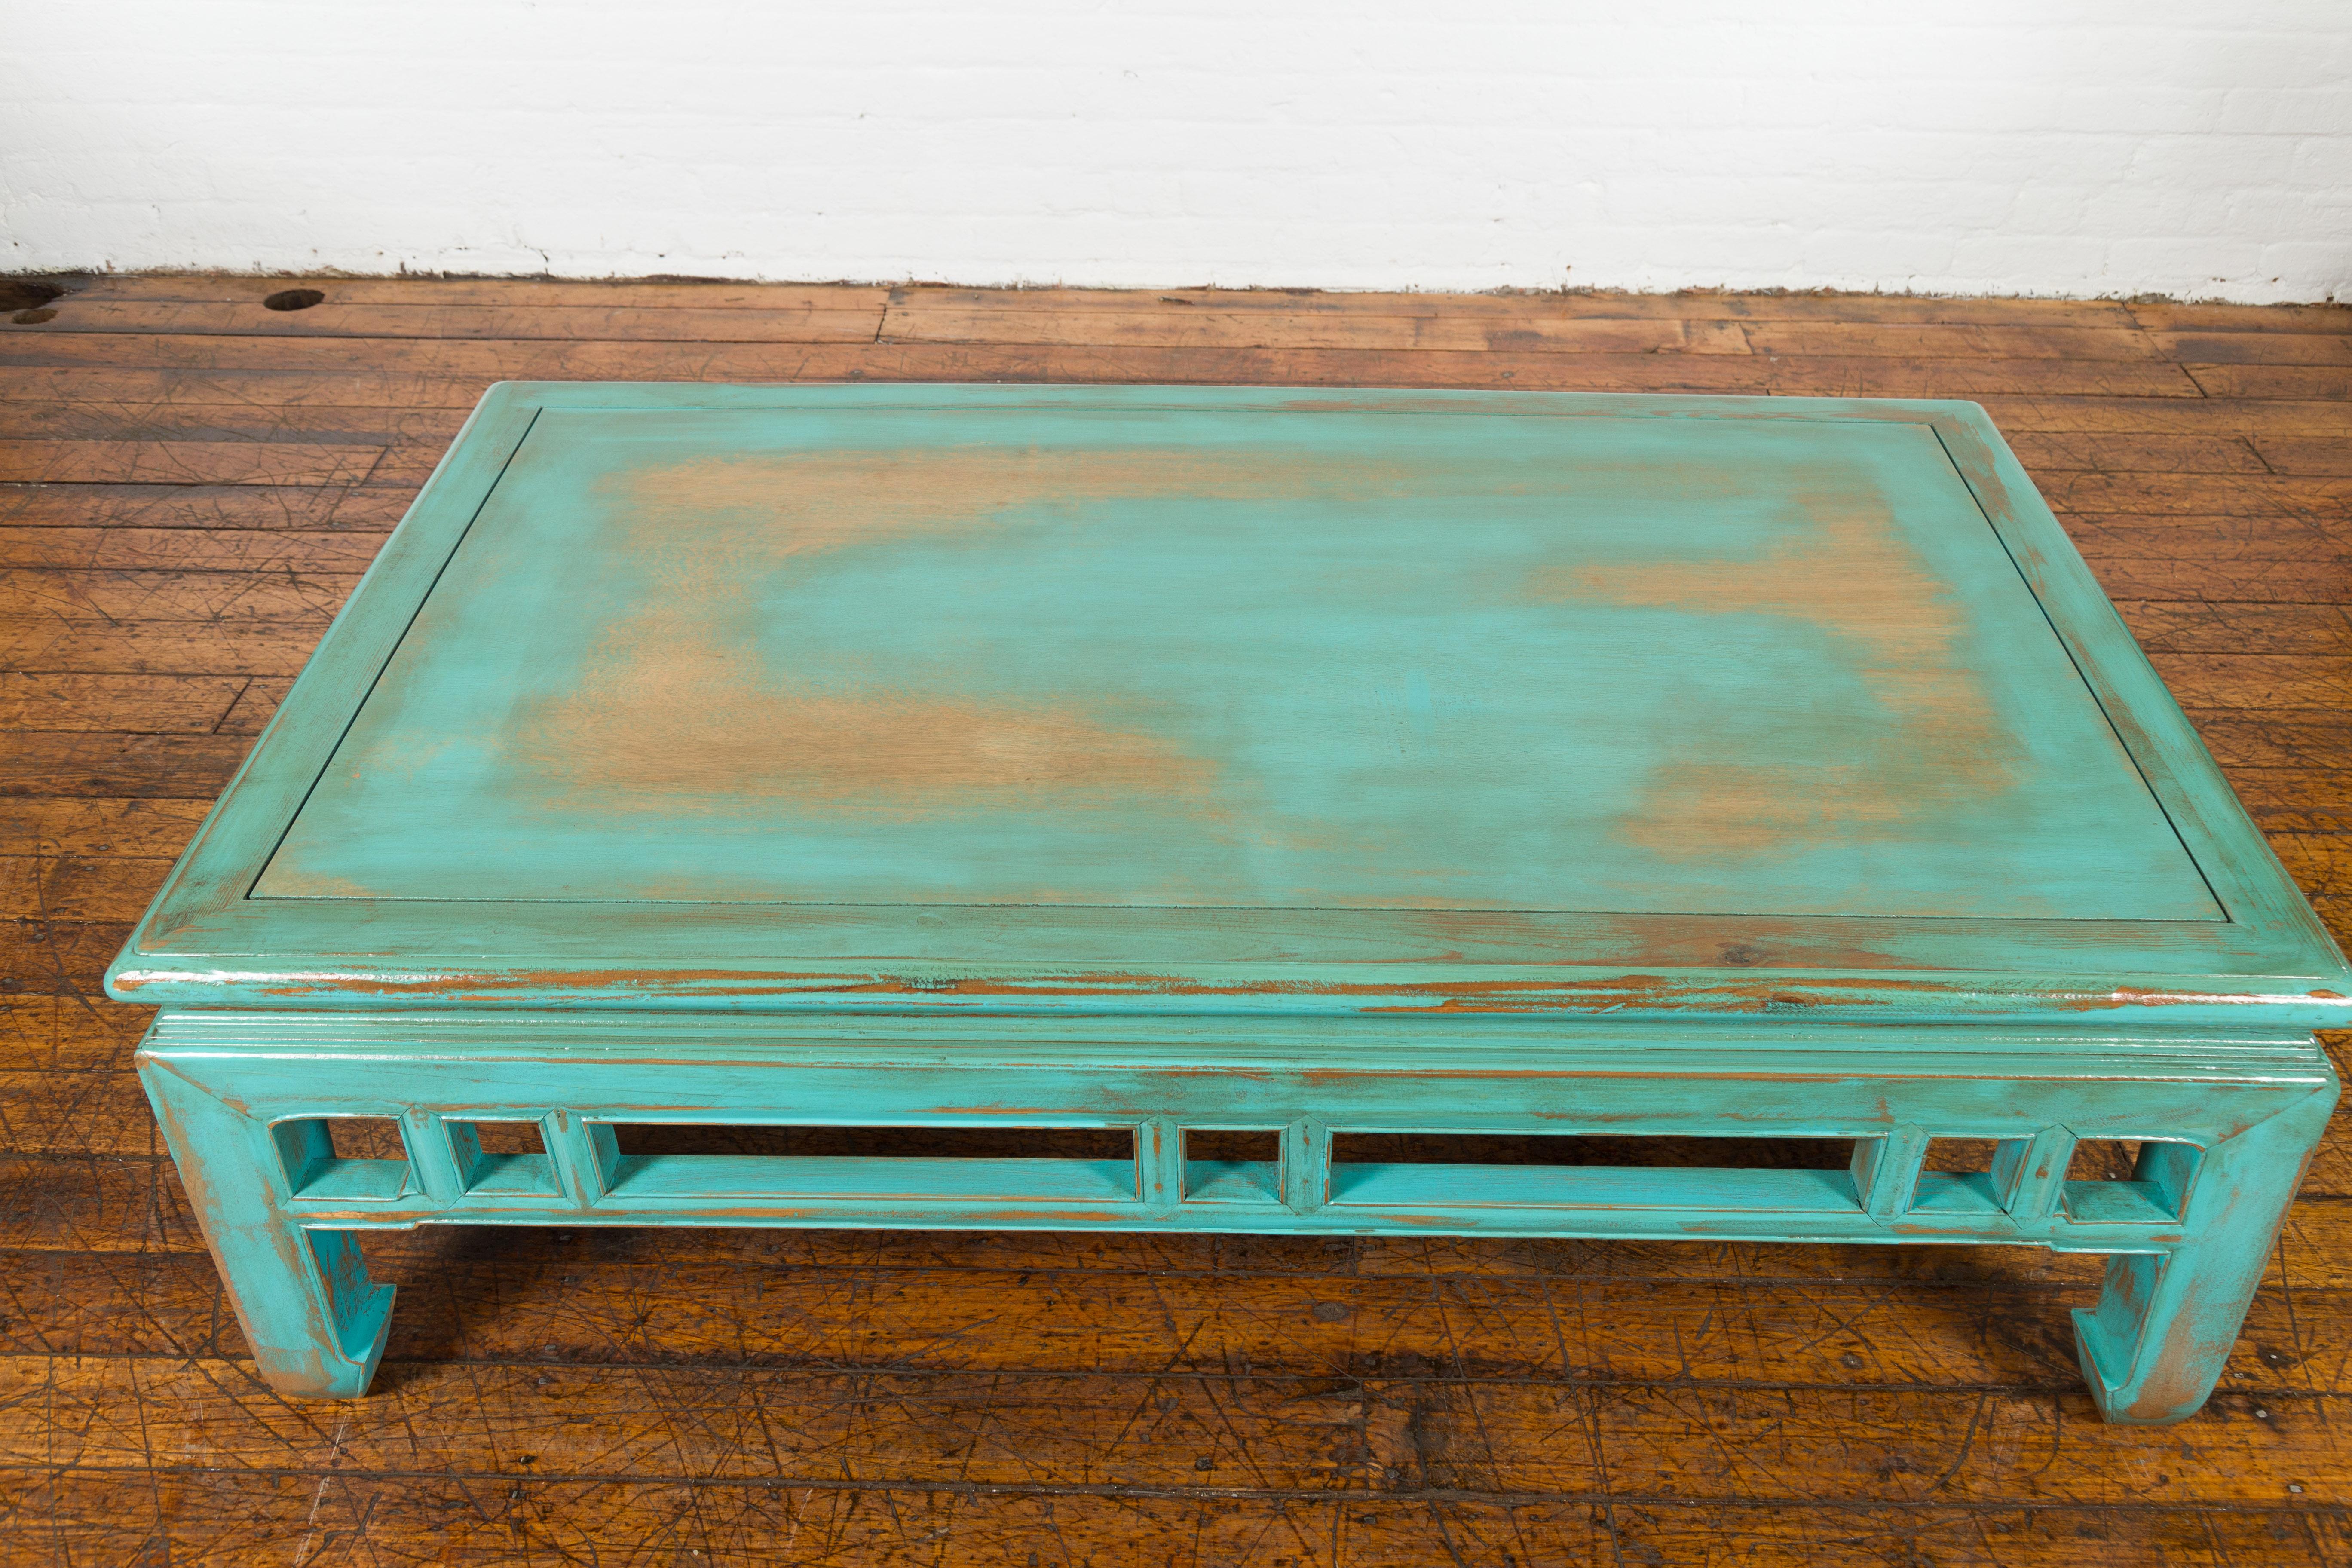 Chinese Qing Dynasty Low Kang Coffee Table with Custom Aqua Teal Lacquer For Sale 7